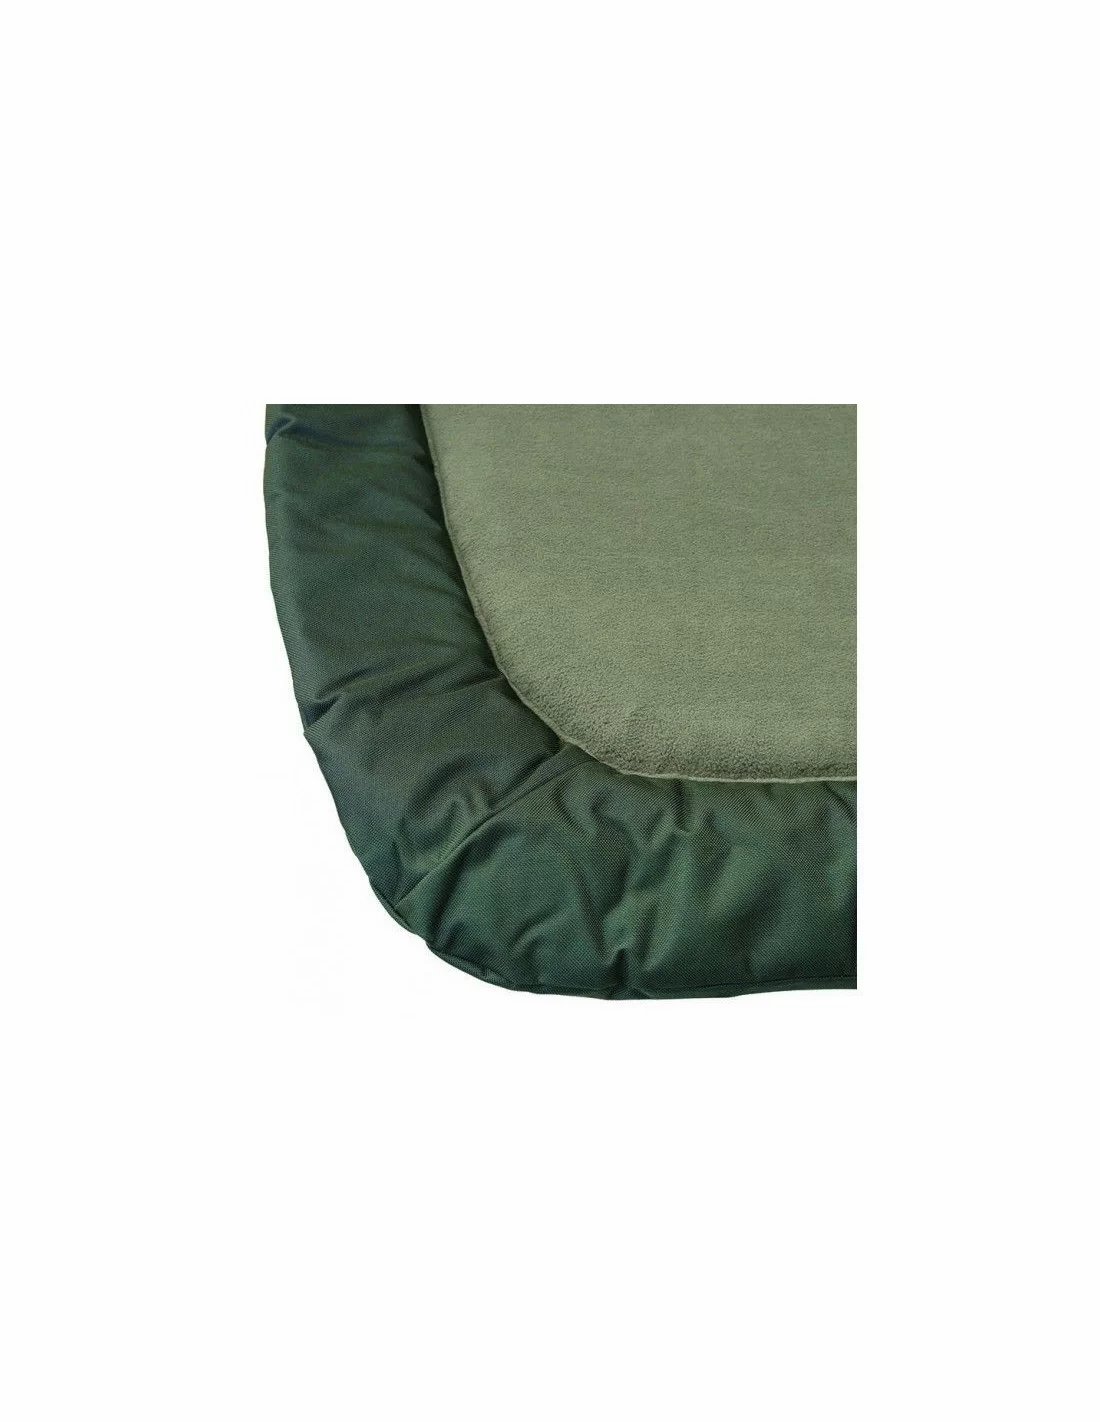 NGT Classic Bedchair with Recliner легло